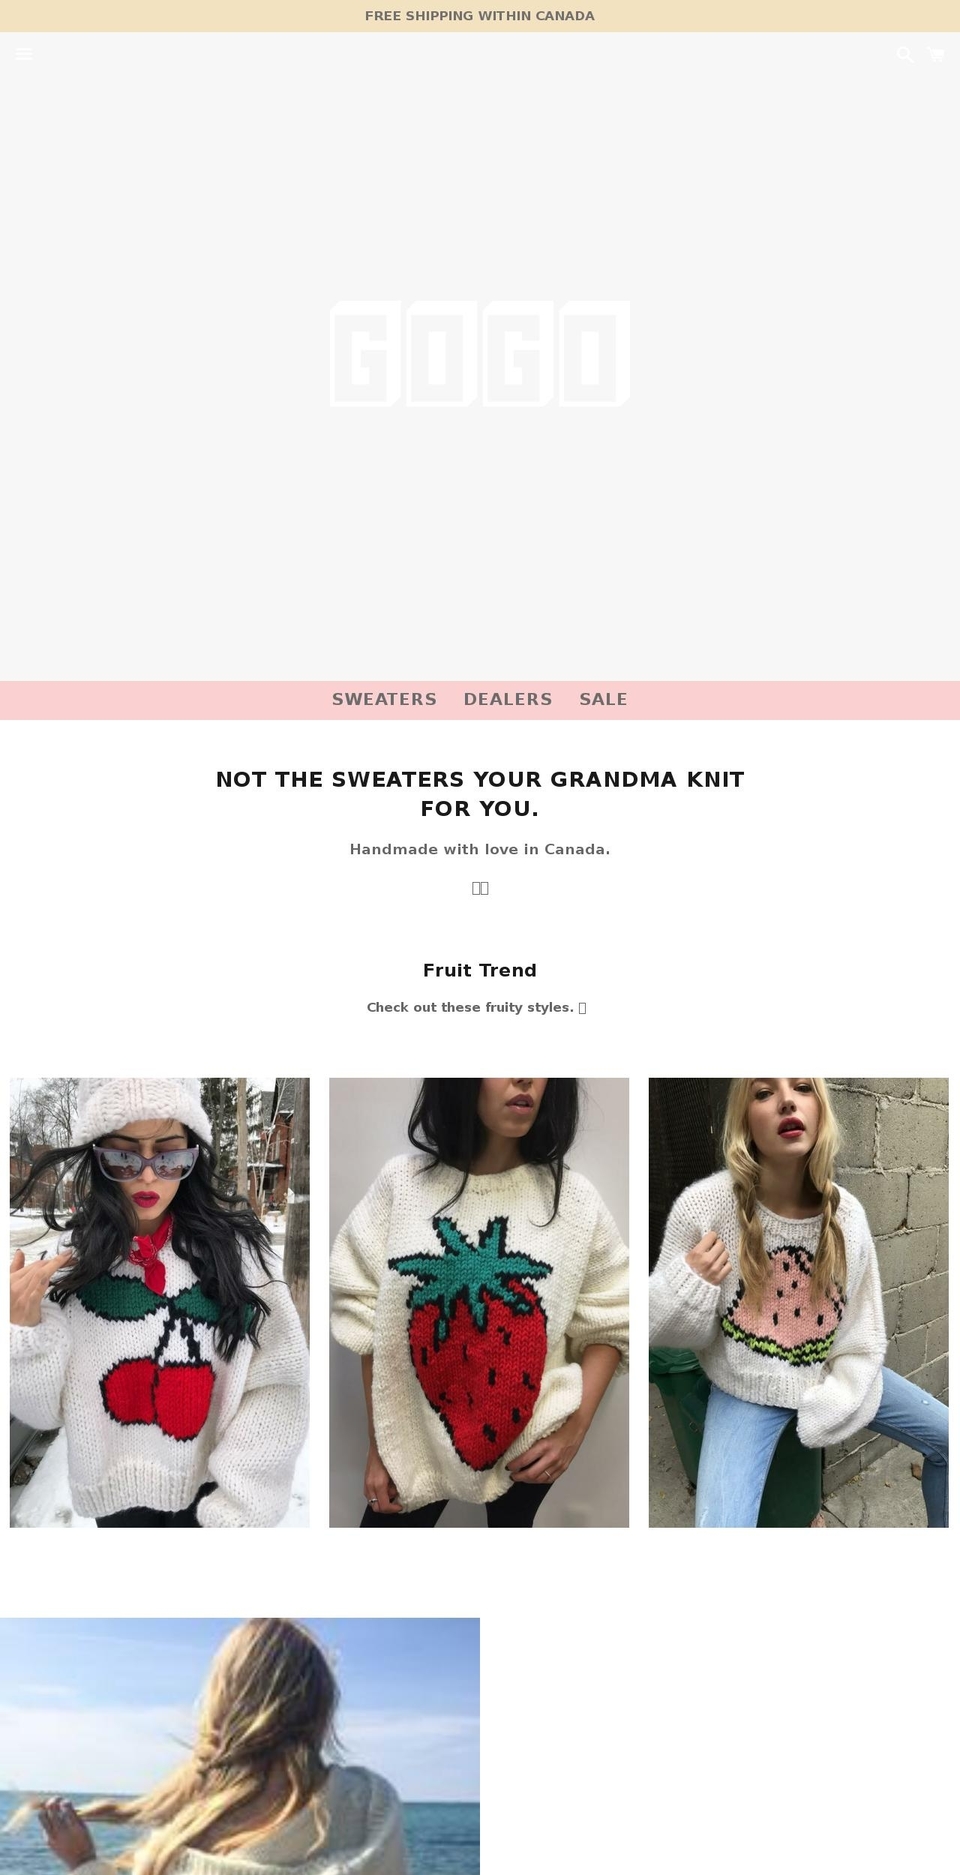 Capital Shopify theme site example gogosweaters.com